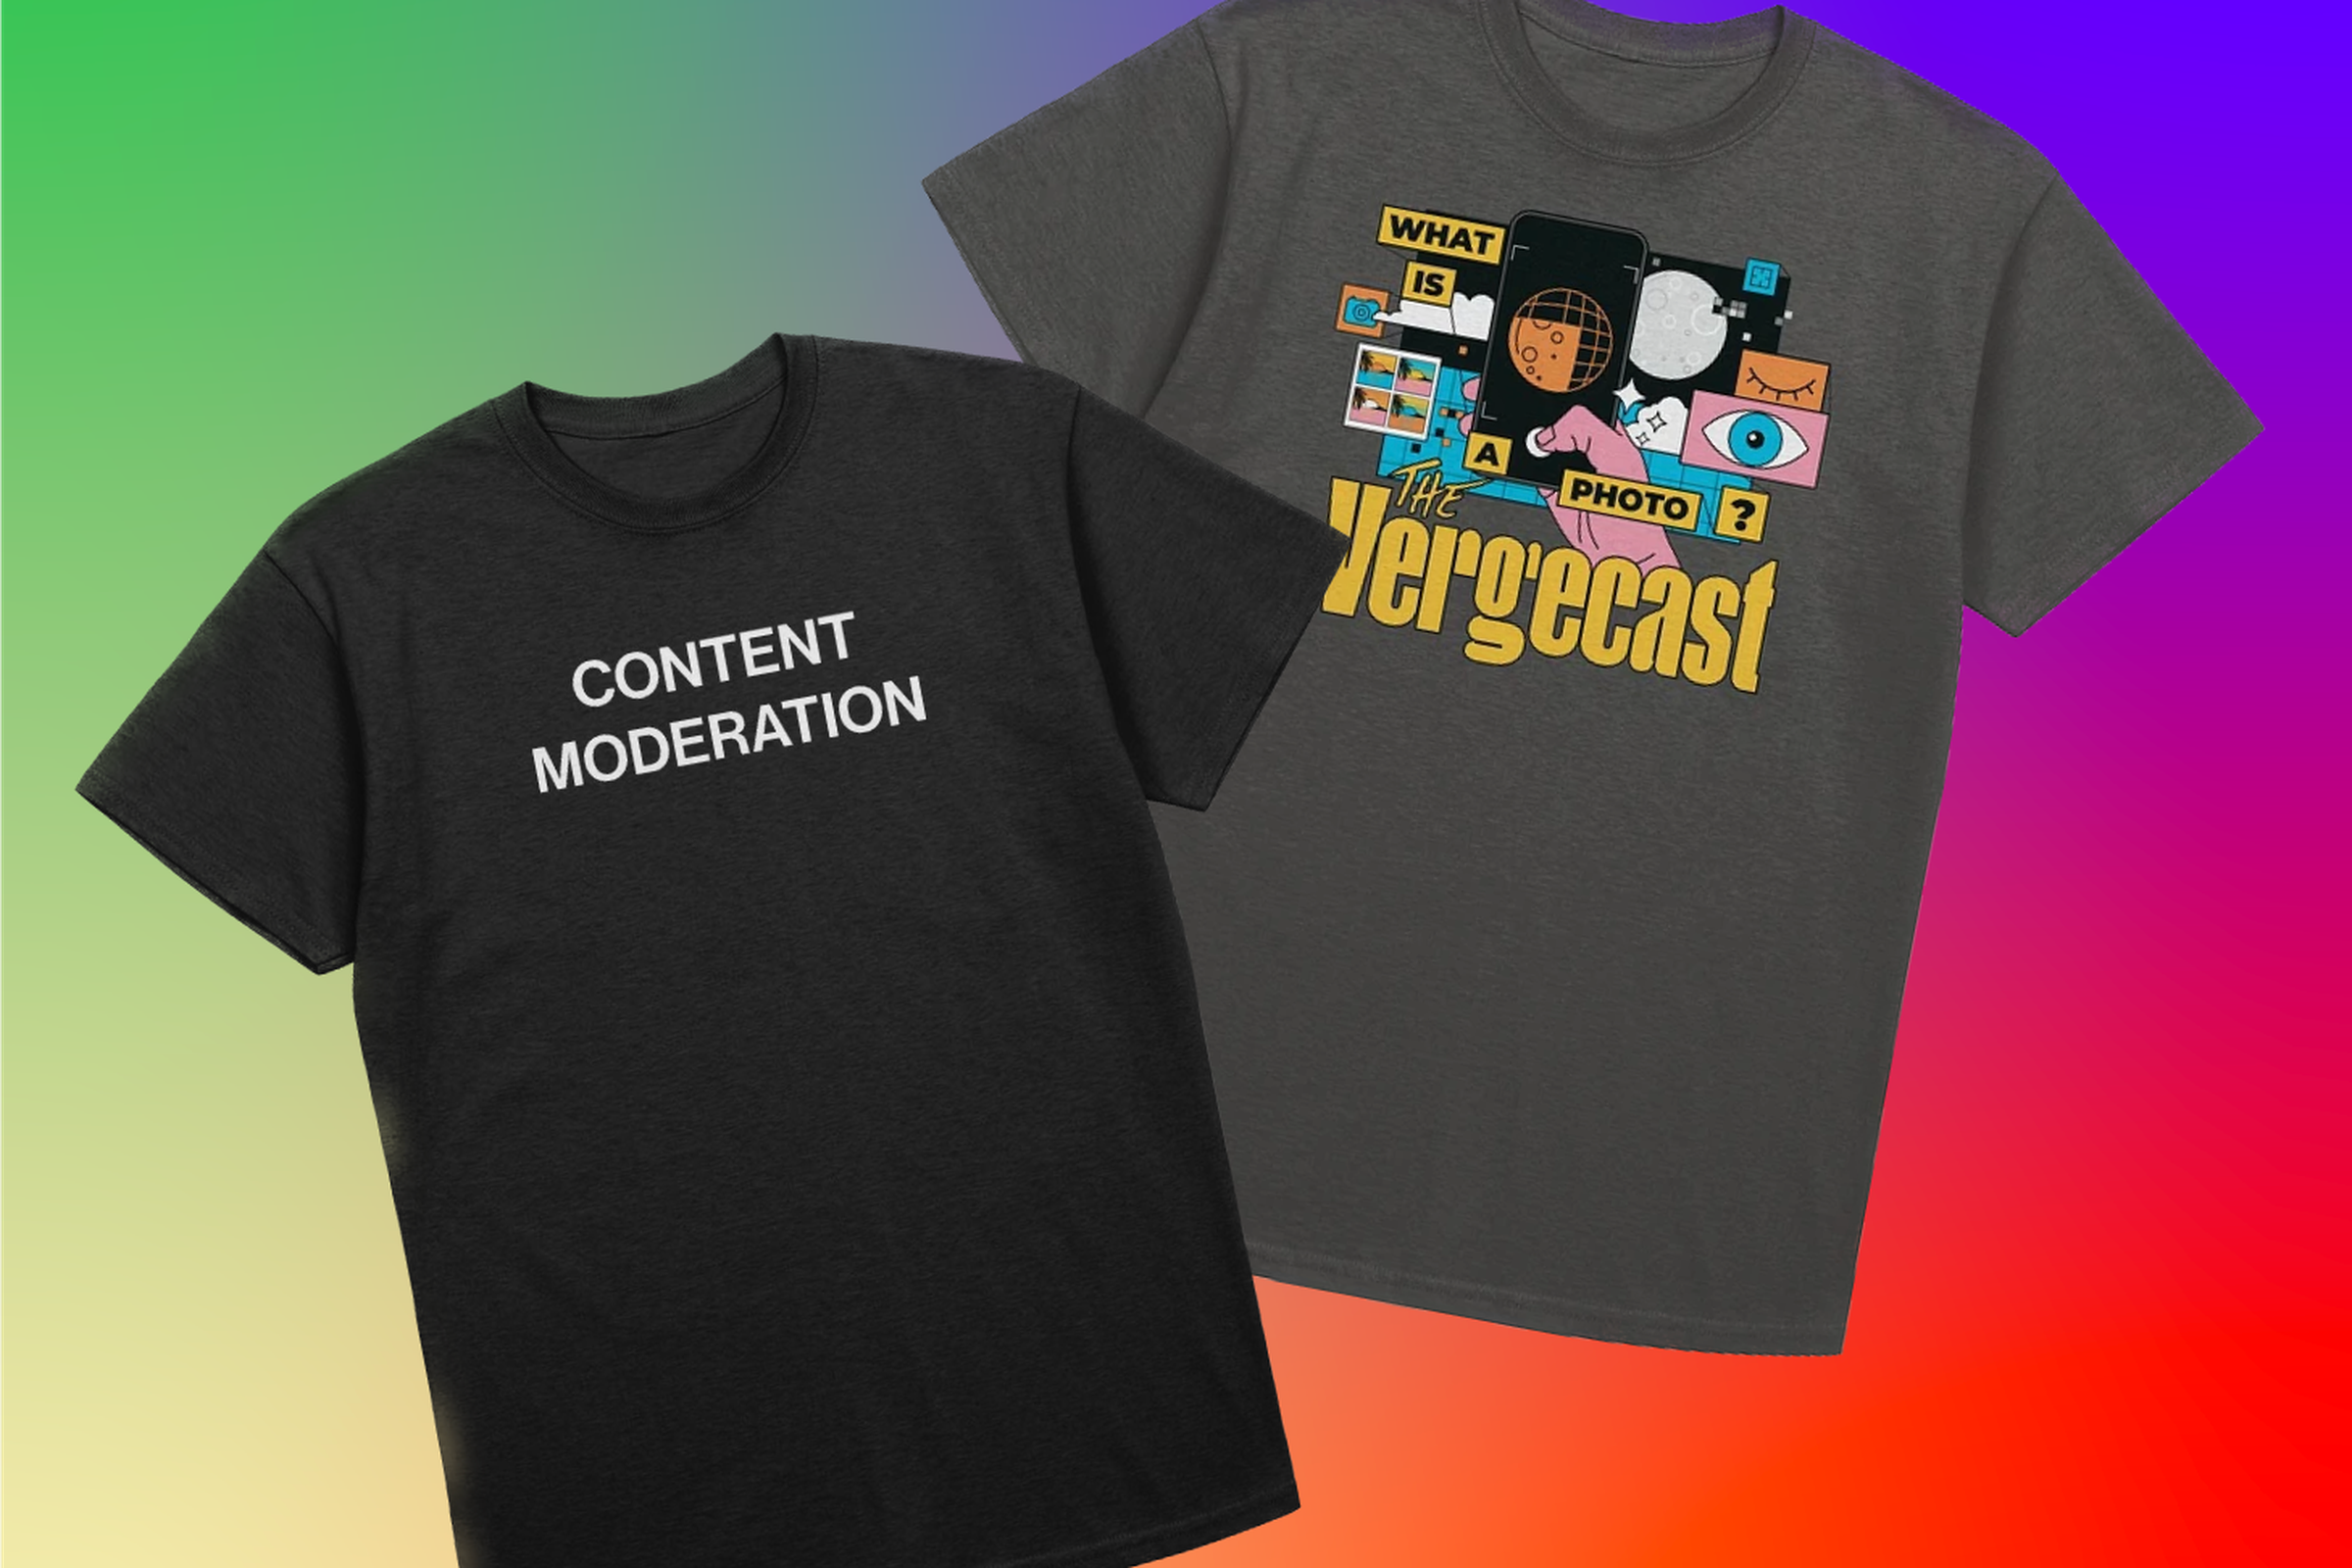 The Verge’s content moderation and what is a photo? shirts